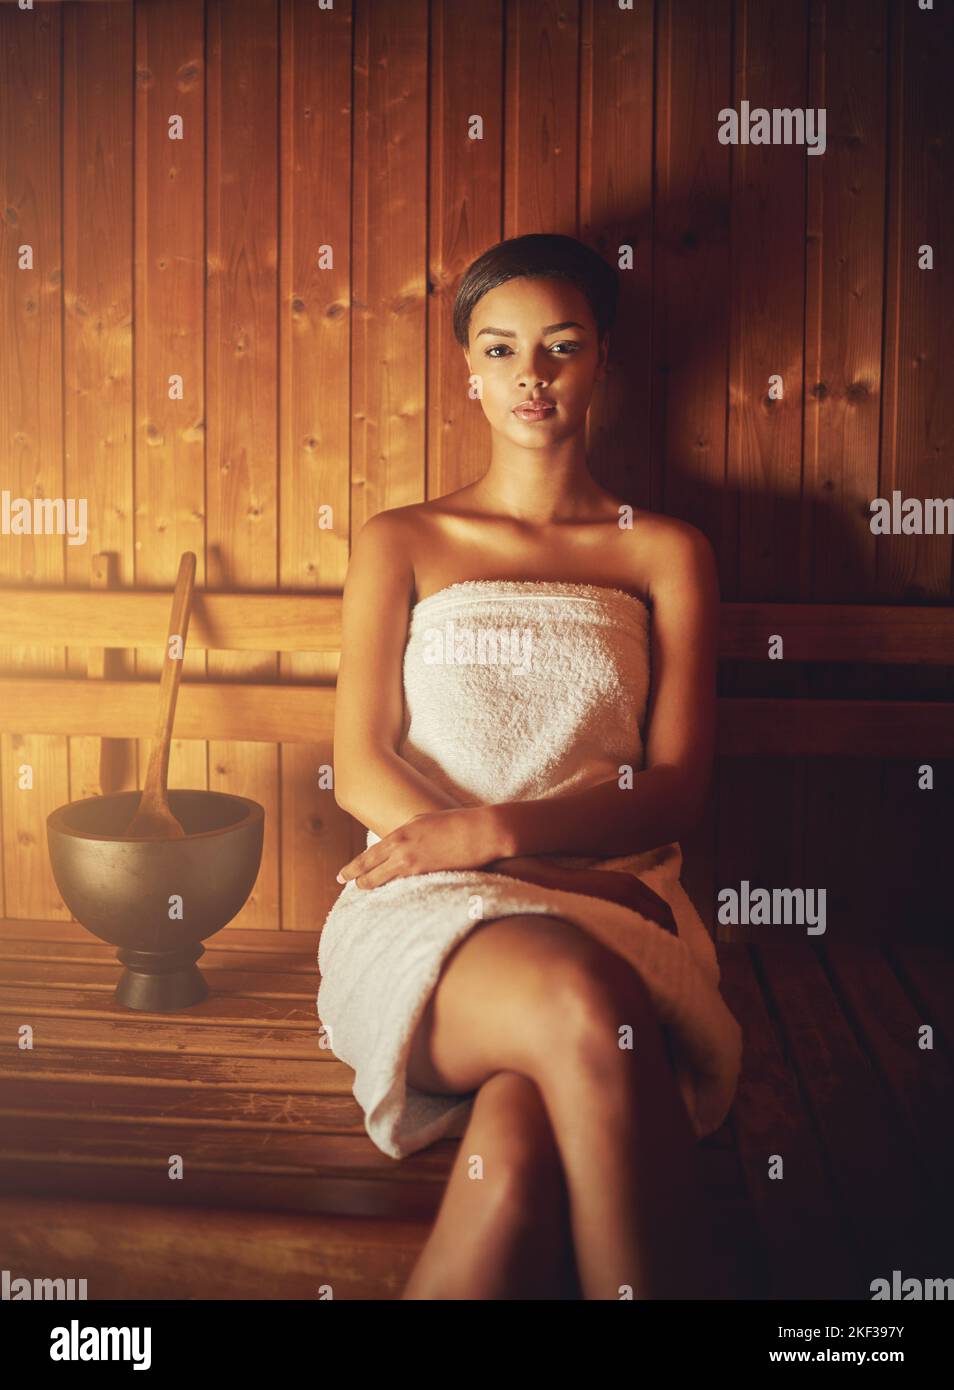 This sauna feels amazing. Cropped portrait of a young woman relaxing in the sauna at a spa. Stock Photo